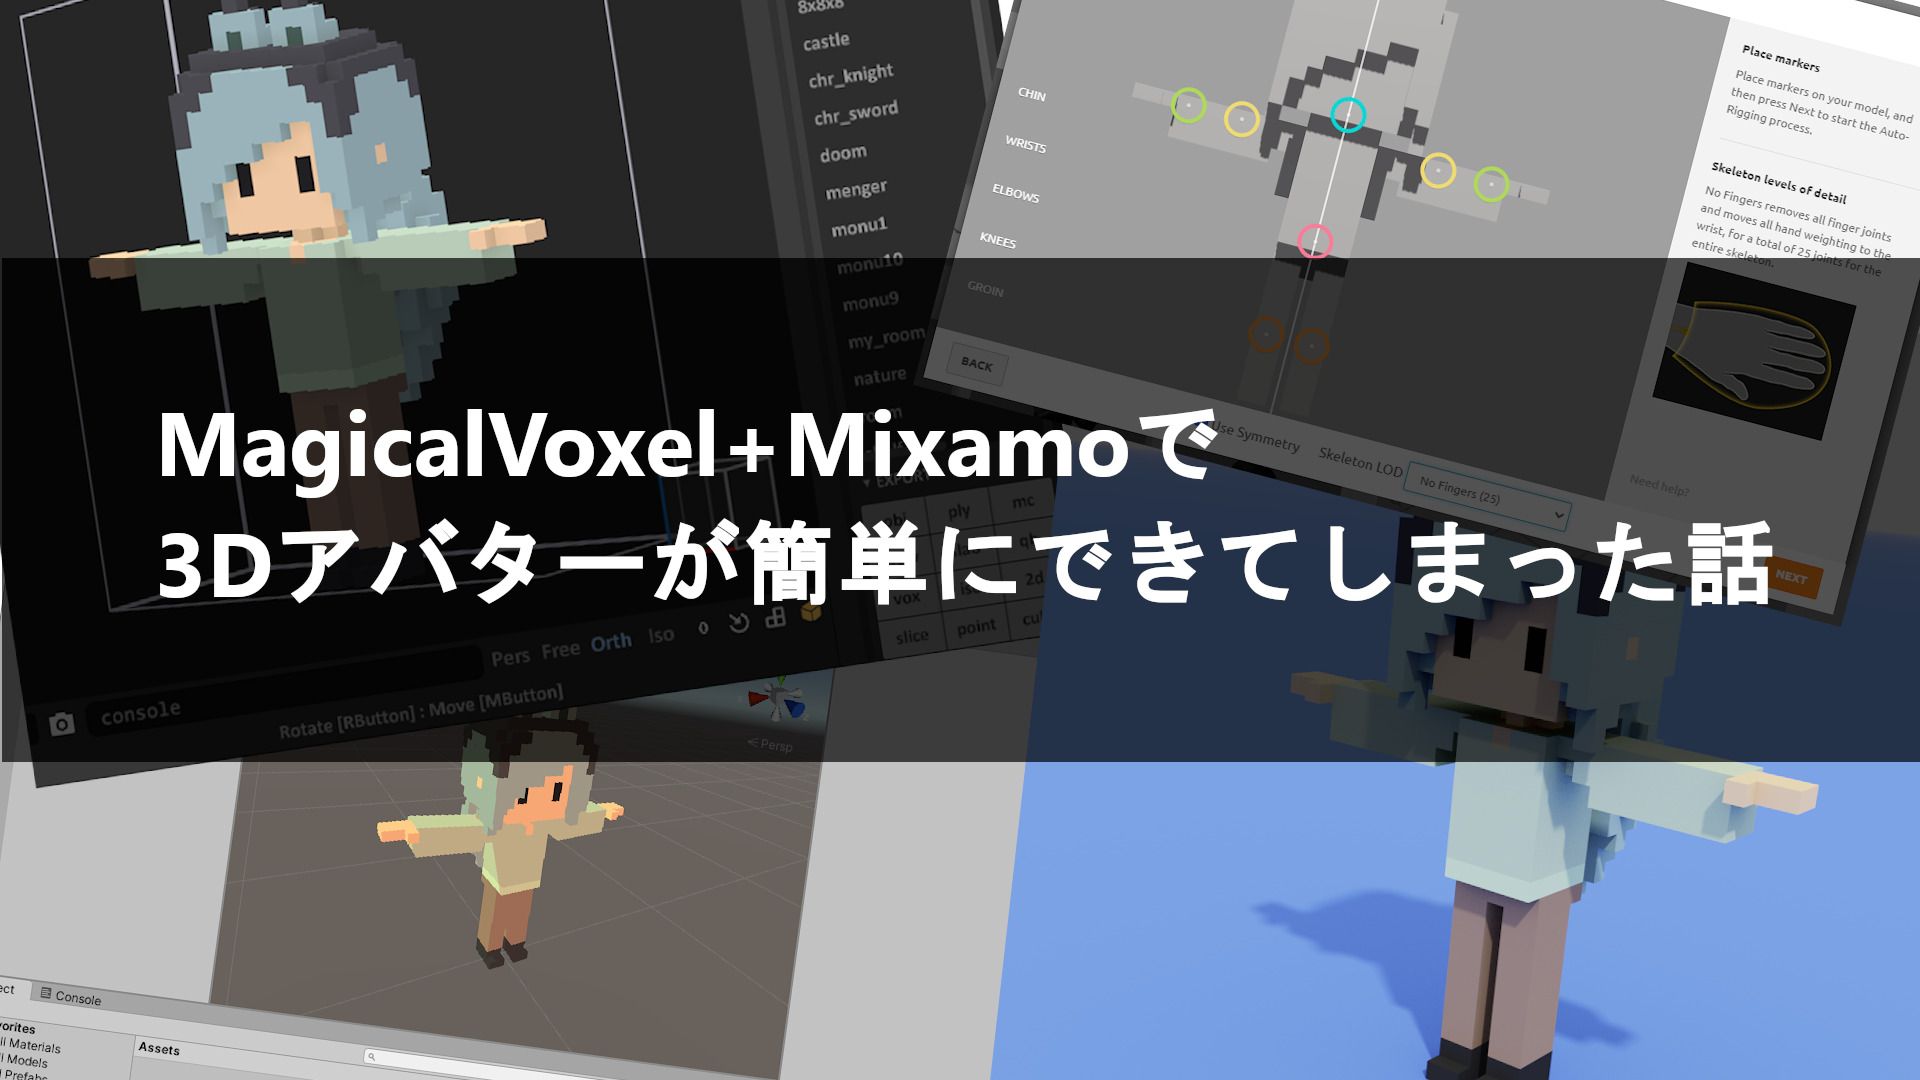 You are currently viewing MagicalVoxelで3Dアバターが簡単にできてしまった話 VRMファイル作成まで